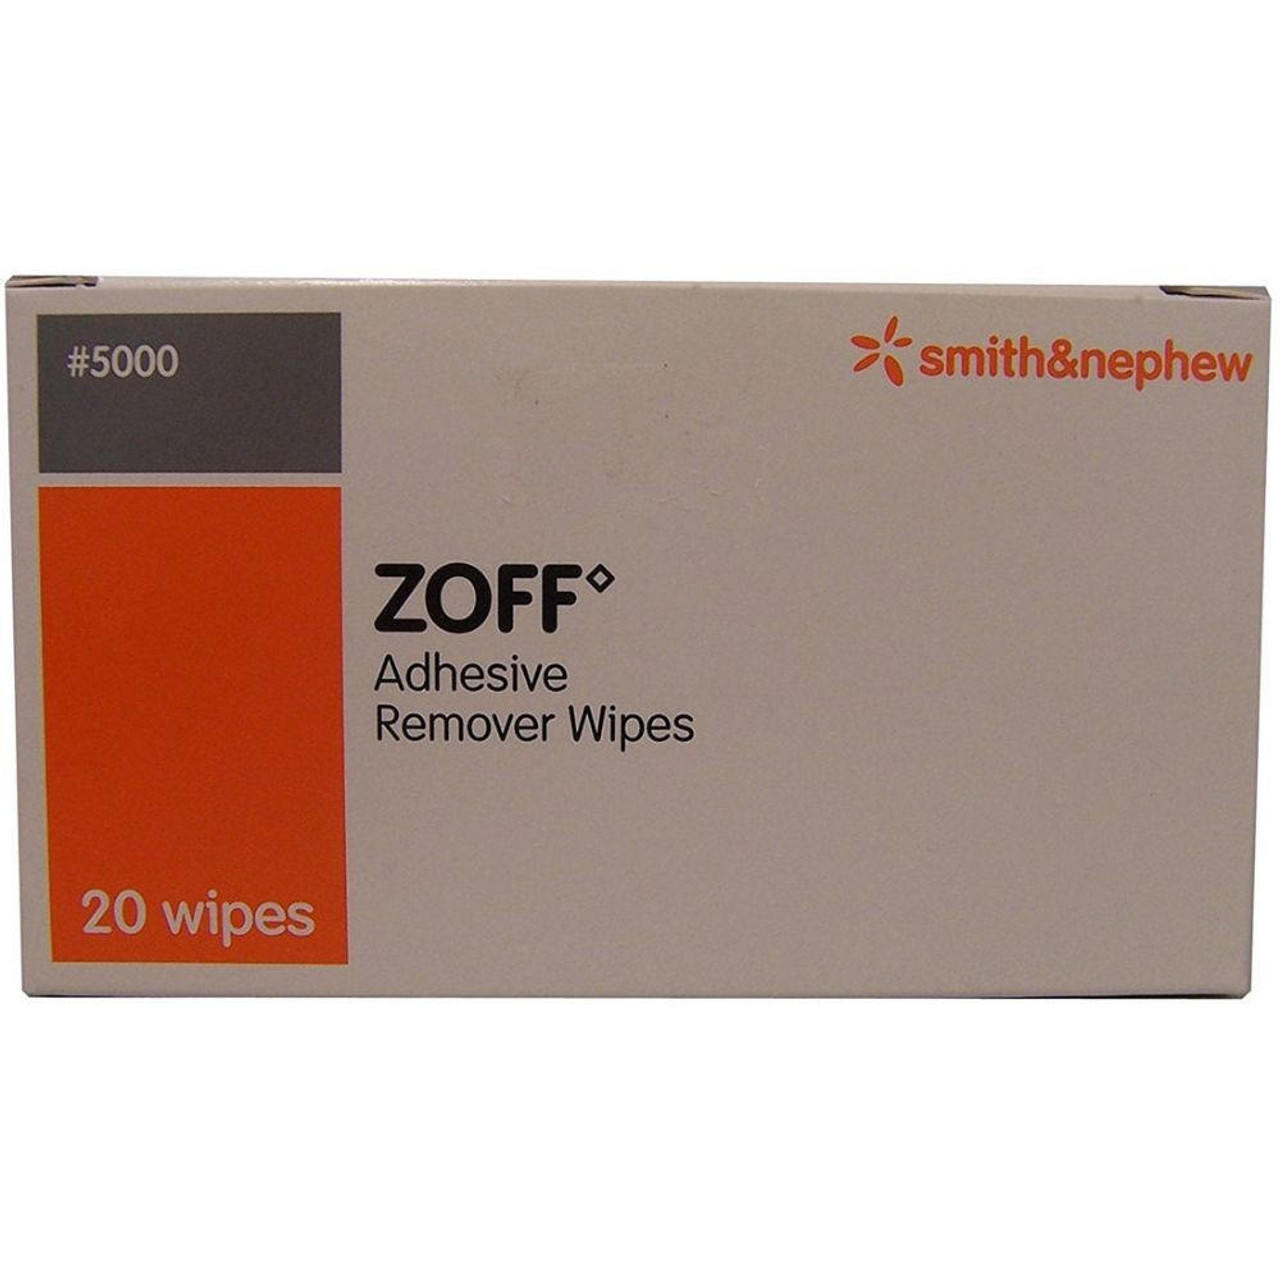 FDR2685 Zoff Adhesive Remover Wipes Pack of 20 for Plasters and Dressings   